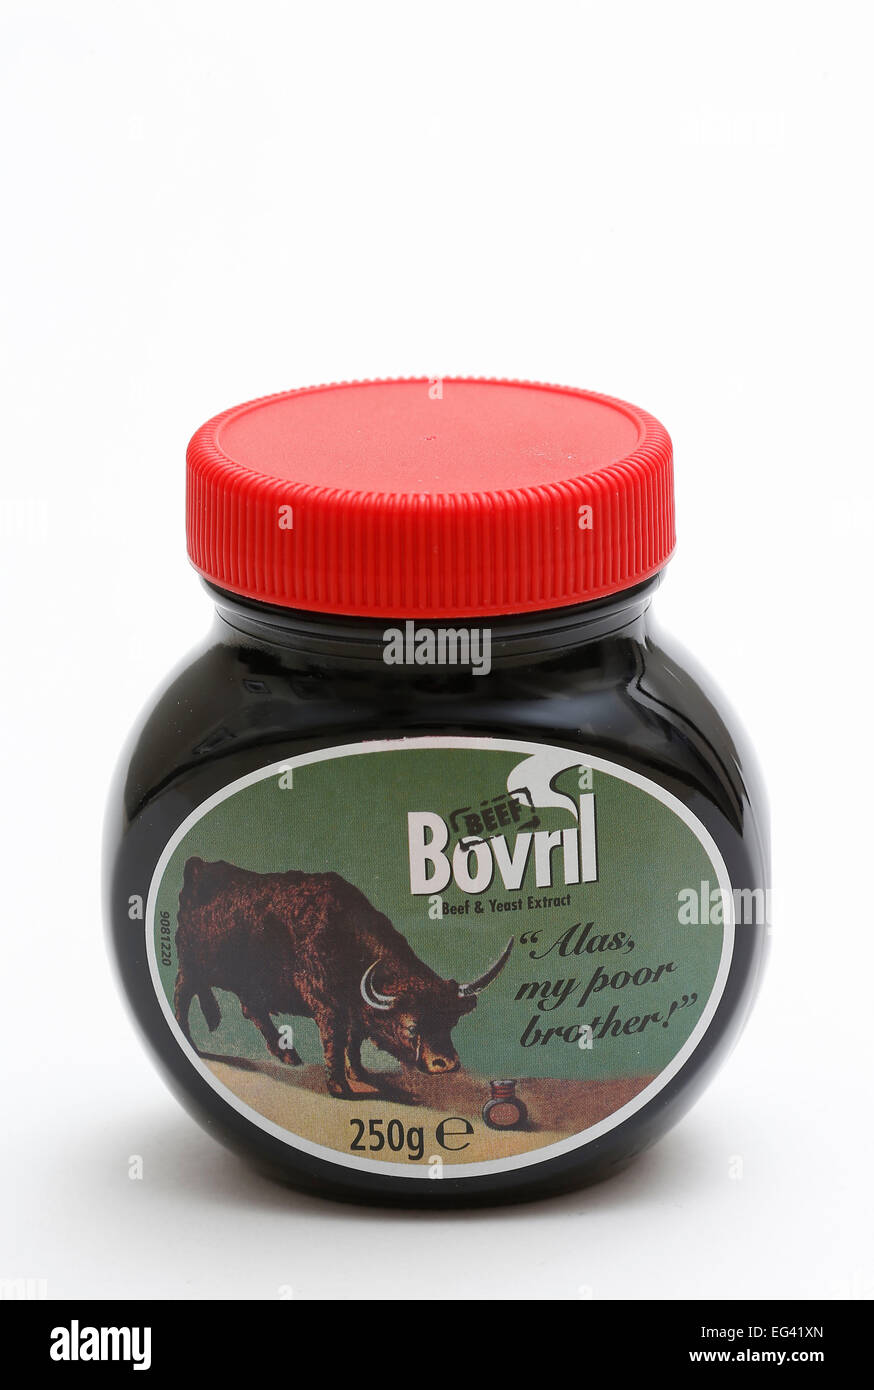 Bovril Beef Extract Spread. Stock Photo